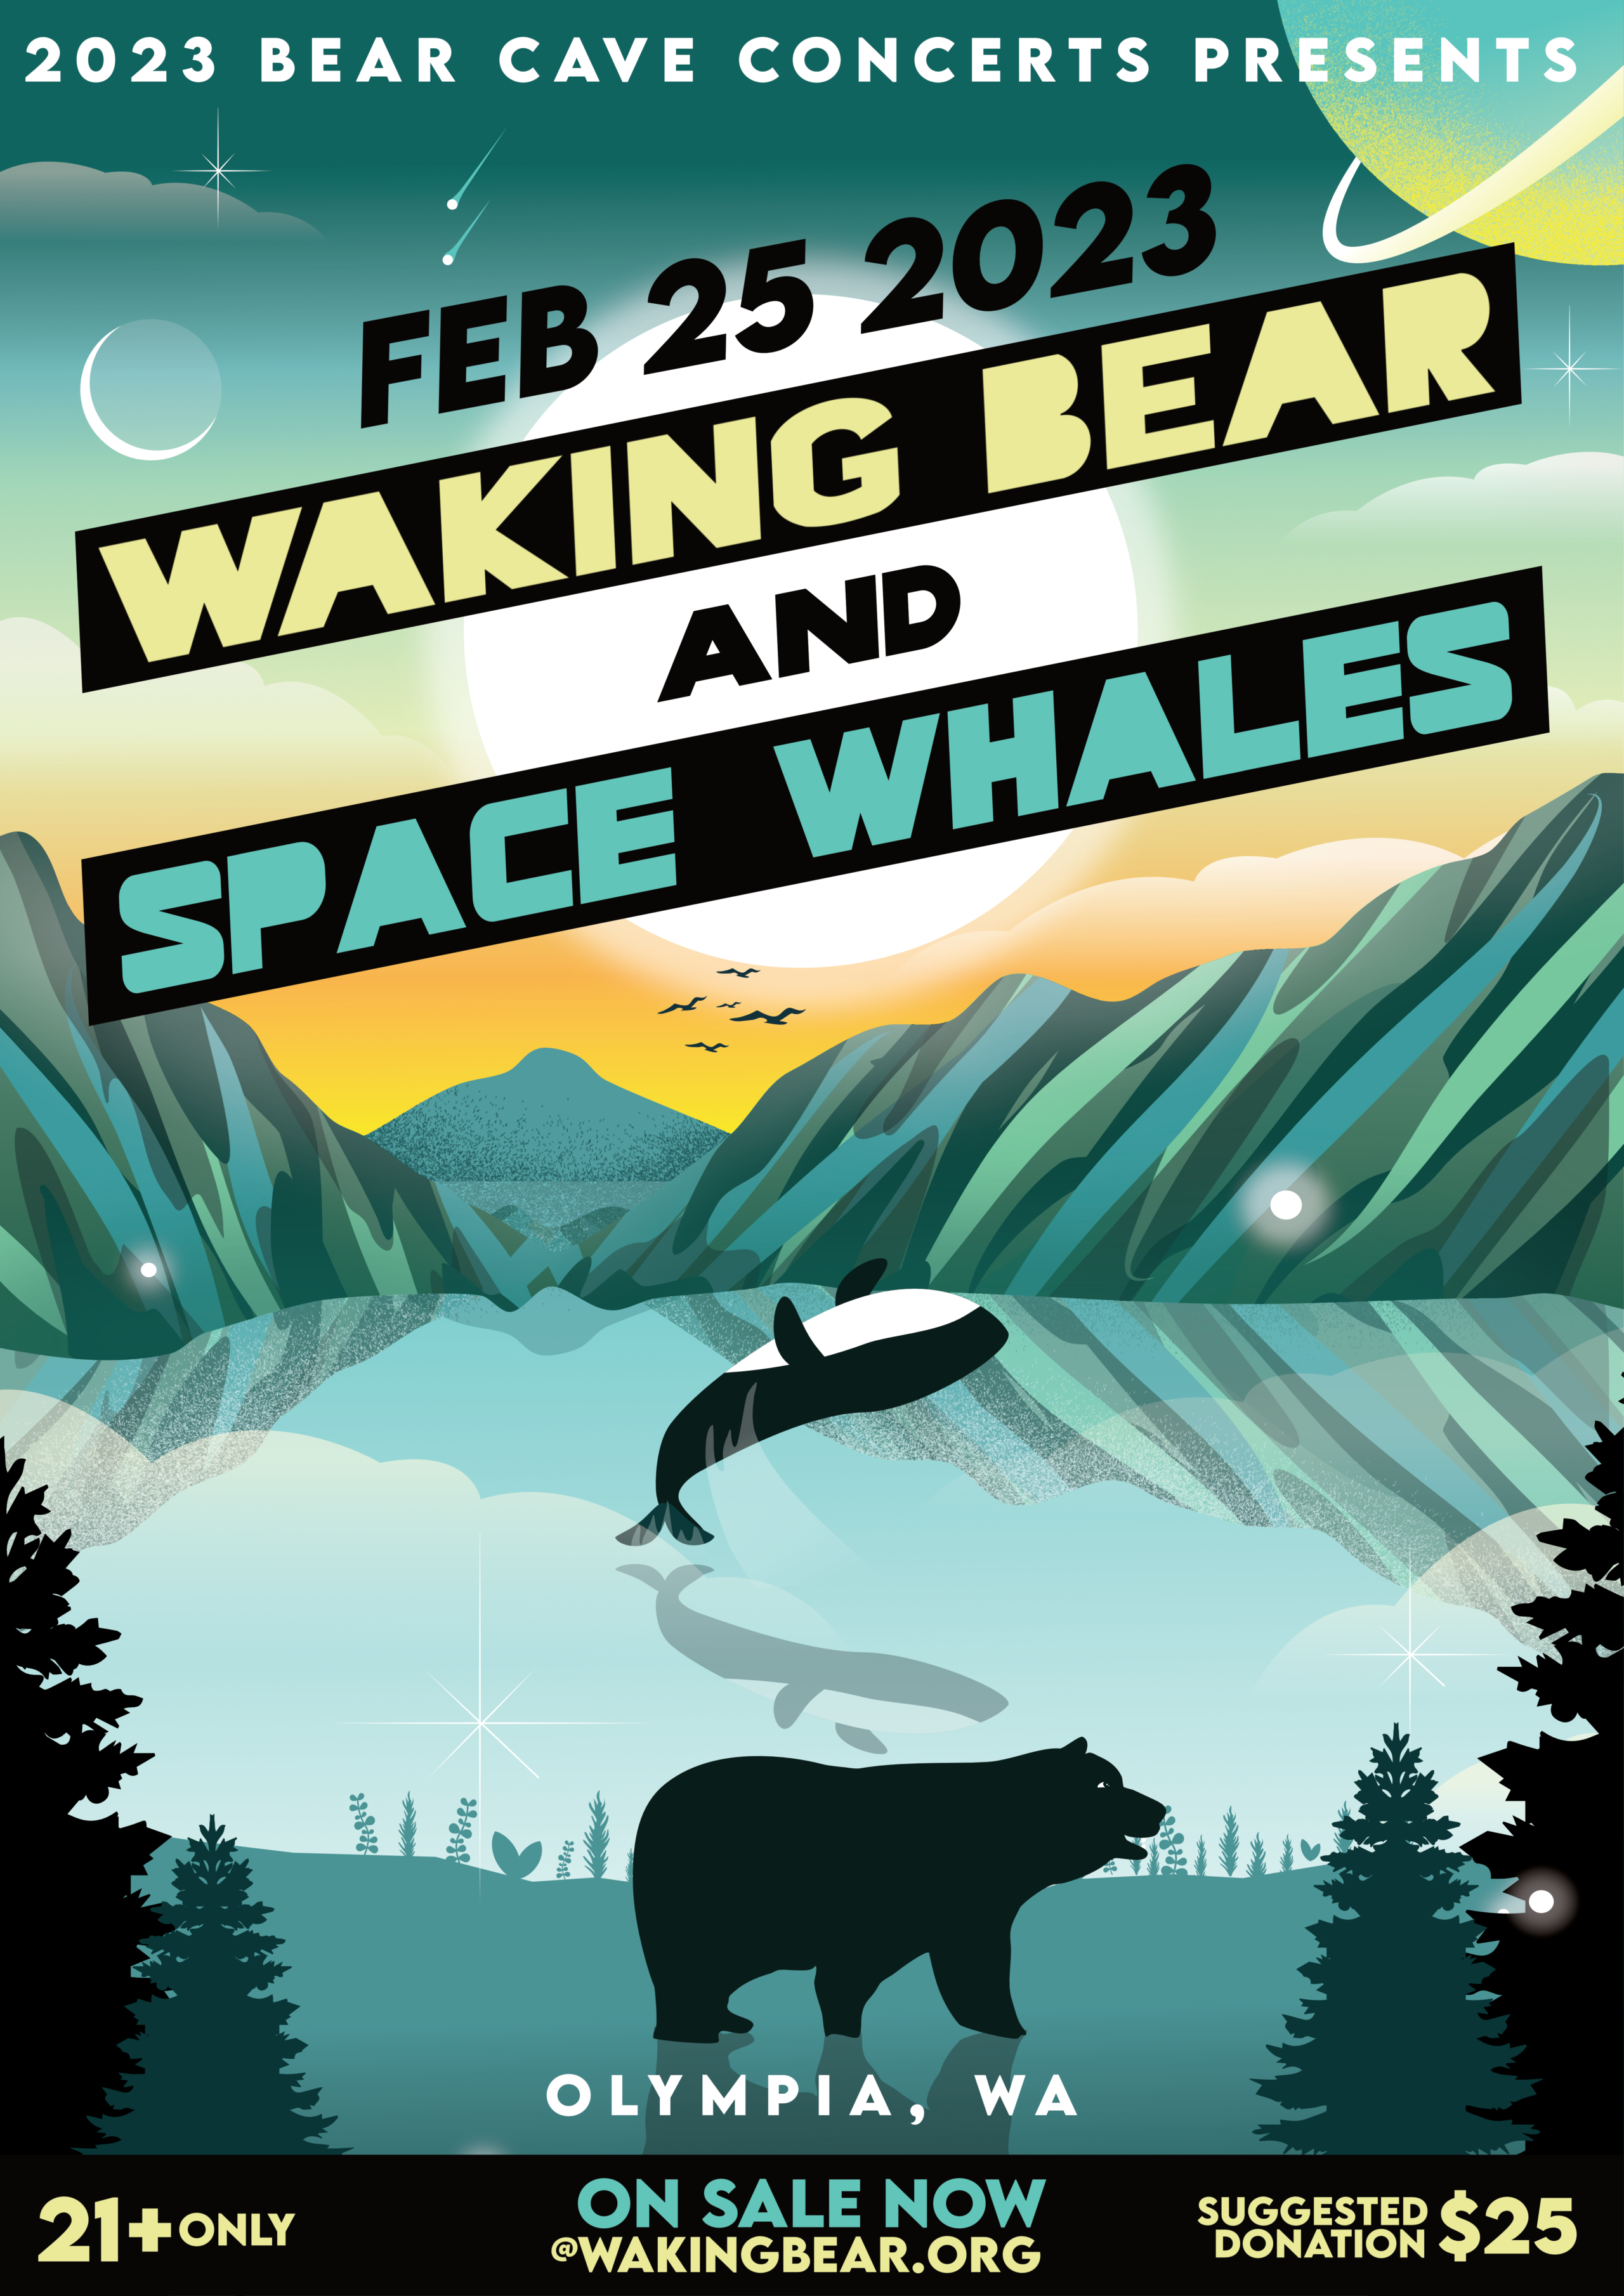 2023 Bear Cave Concert Series - Waking Bear & Space Whales